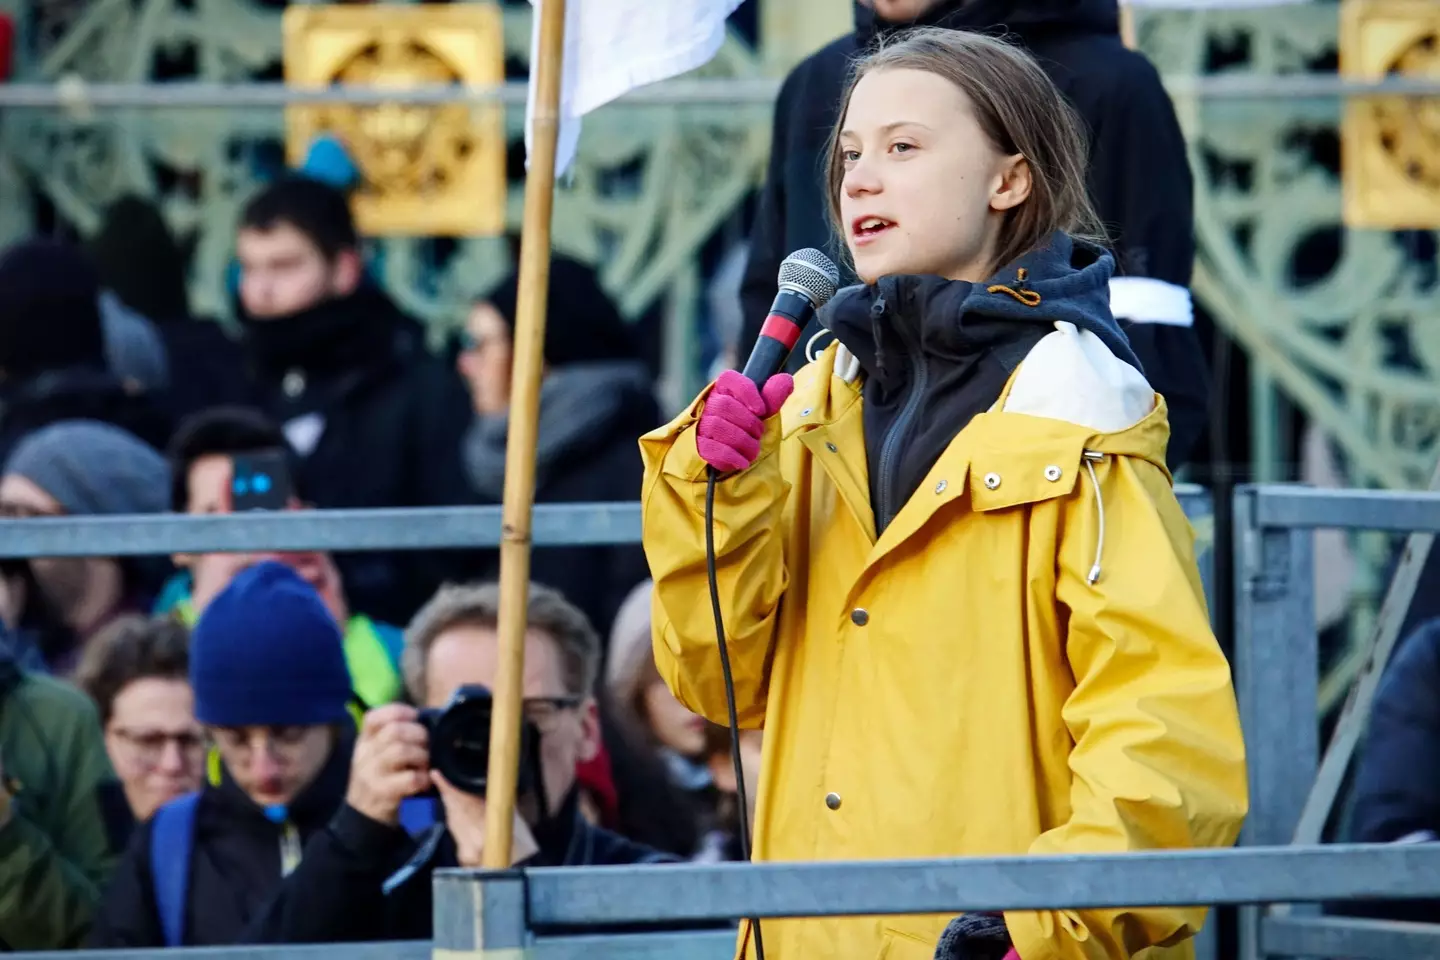 Greta Thunberg at the Fridays For Future event in Turin. Turin, Italy, 2019.